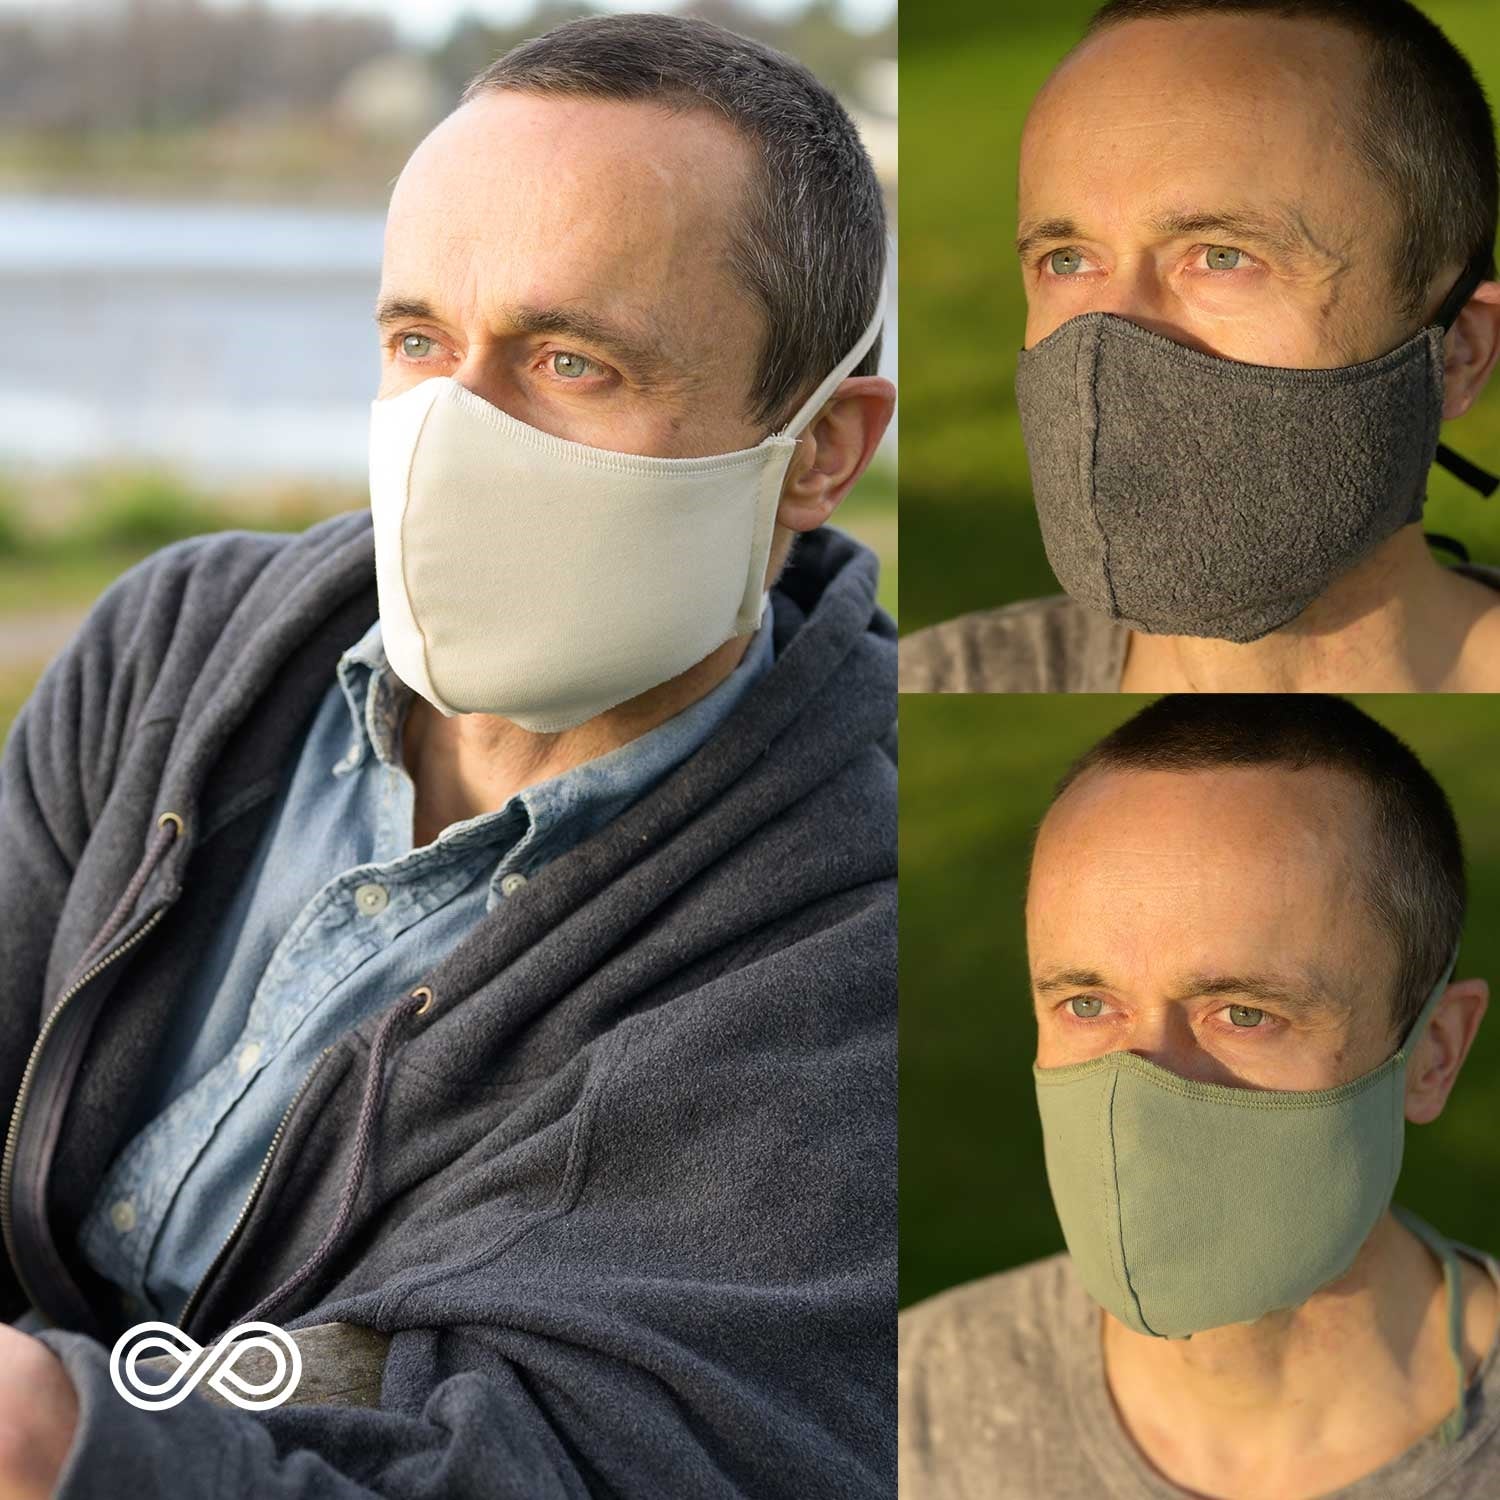 Cottonique Hypoallergenic Face Mask with Adjustable Earloops Made